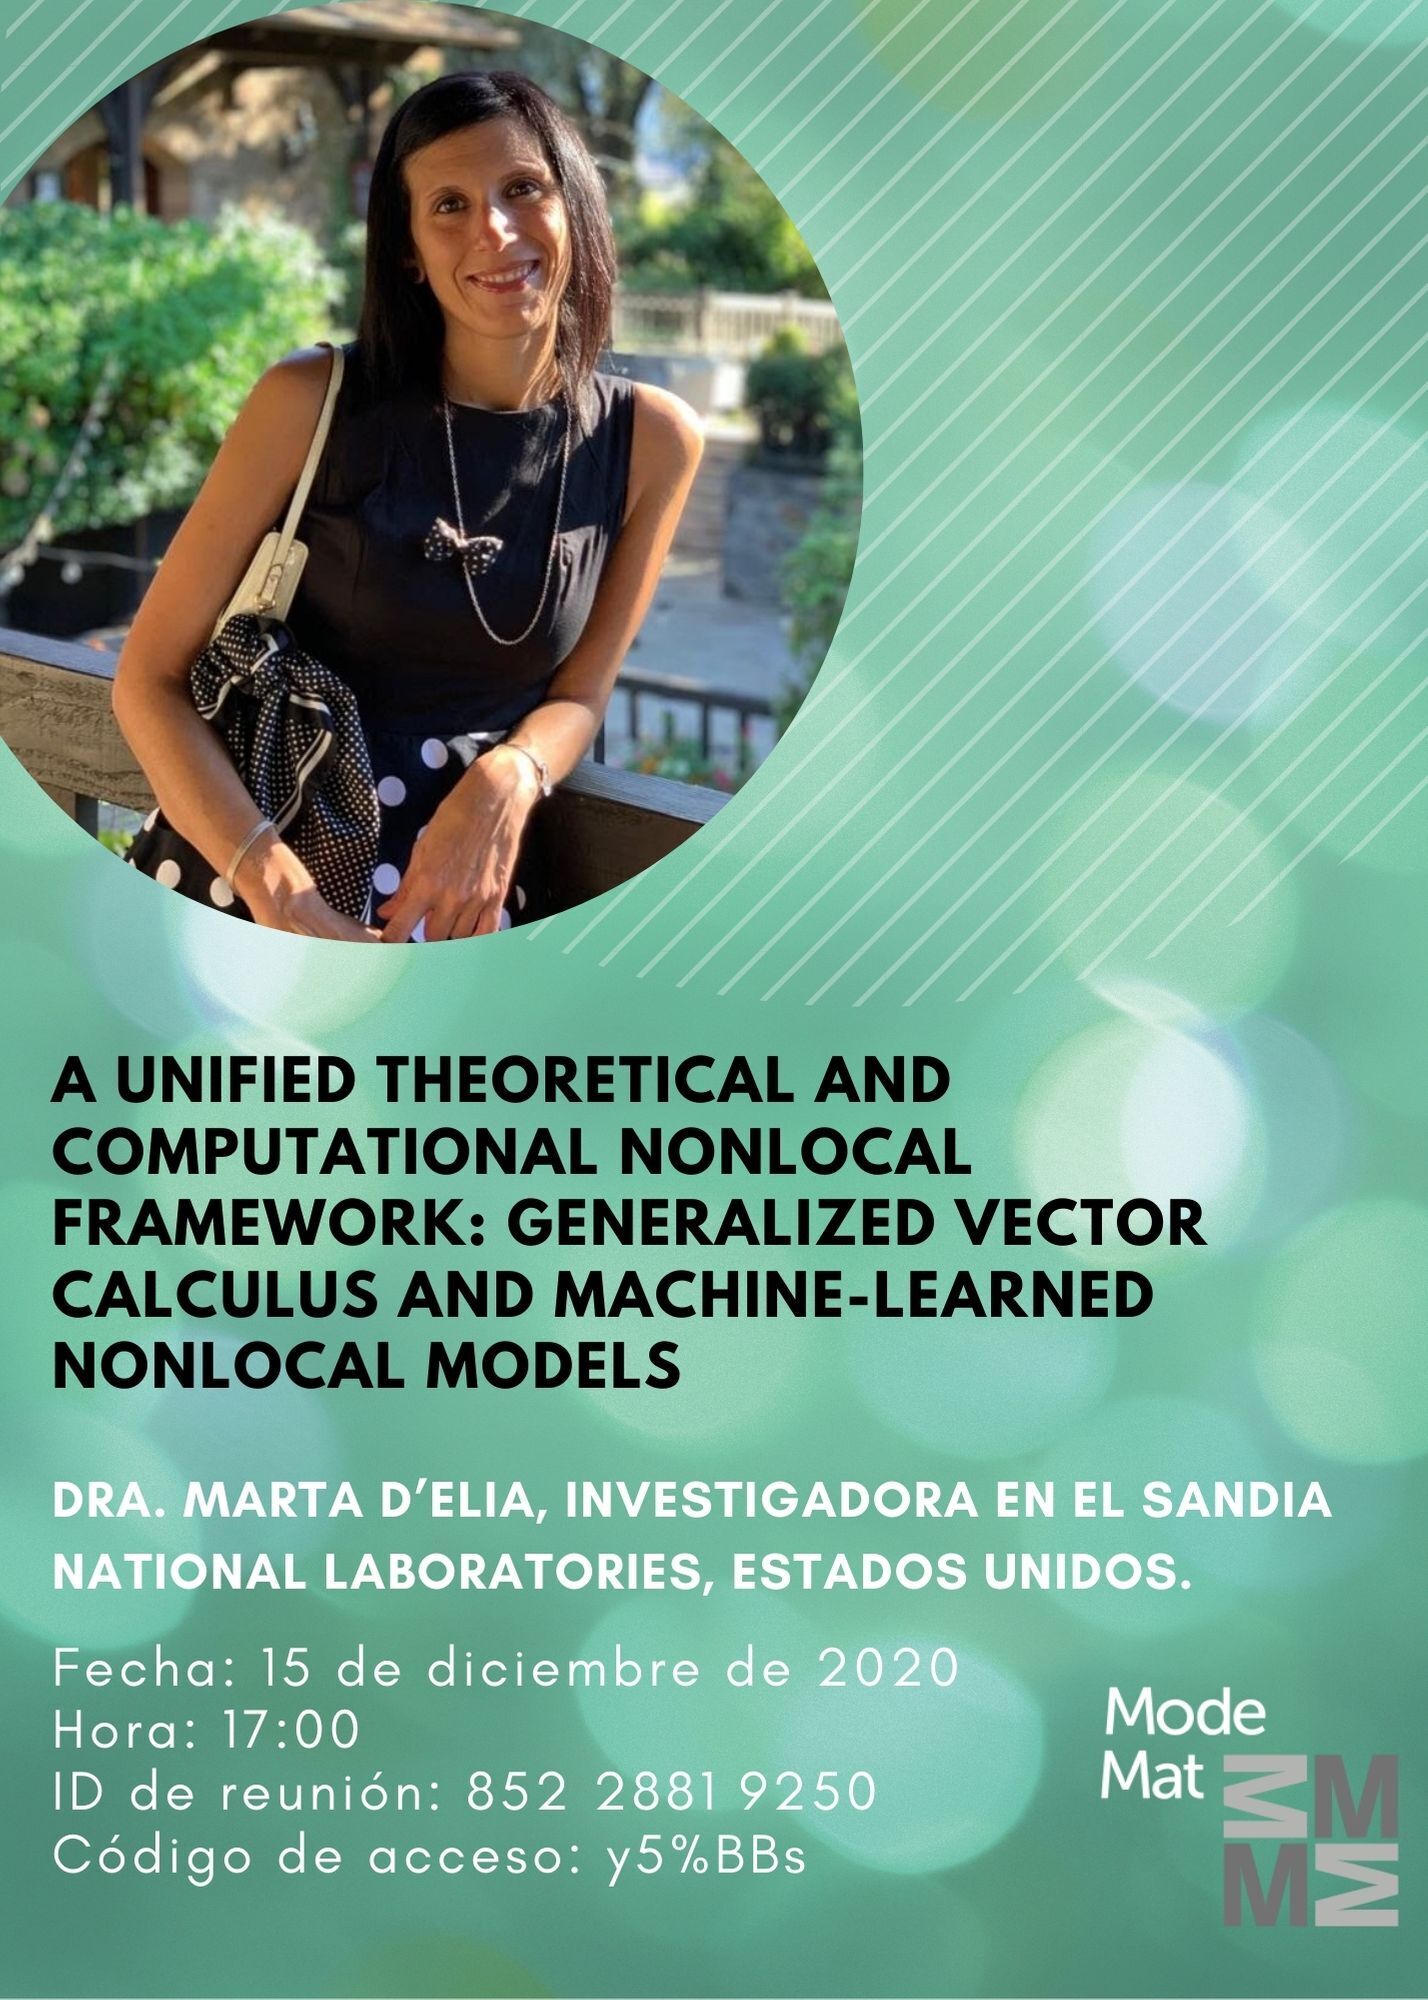 A unified theoretical and computational nonlocal framework: generalized vector calculus and machine-learned nonlocal models